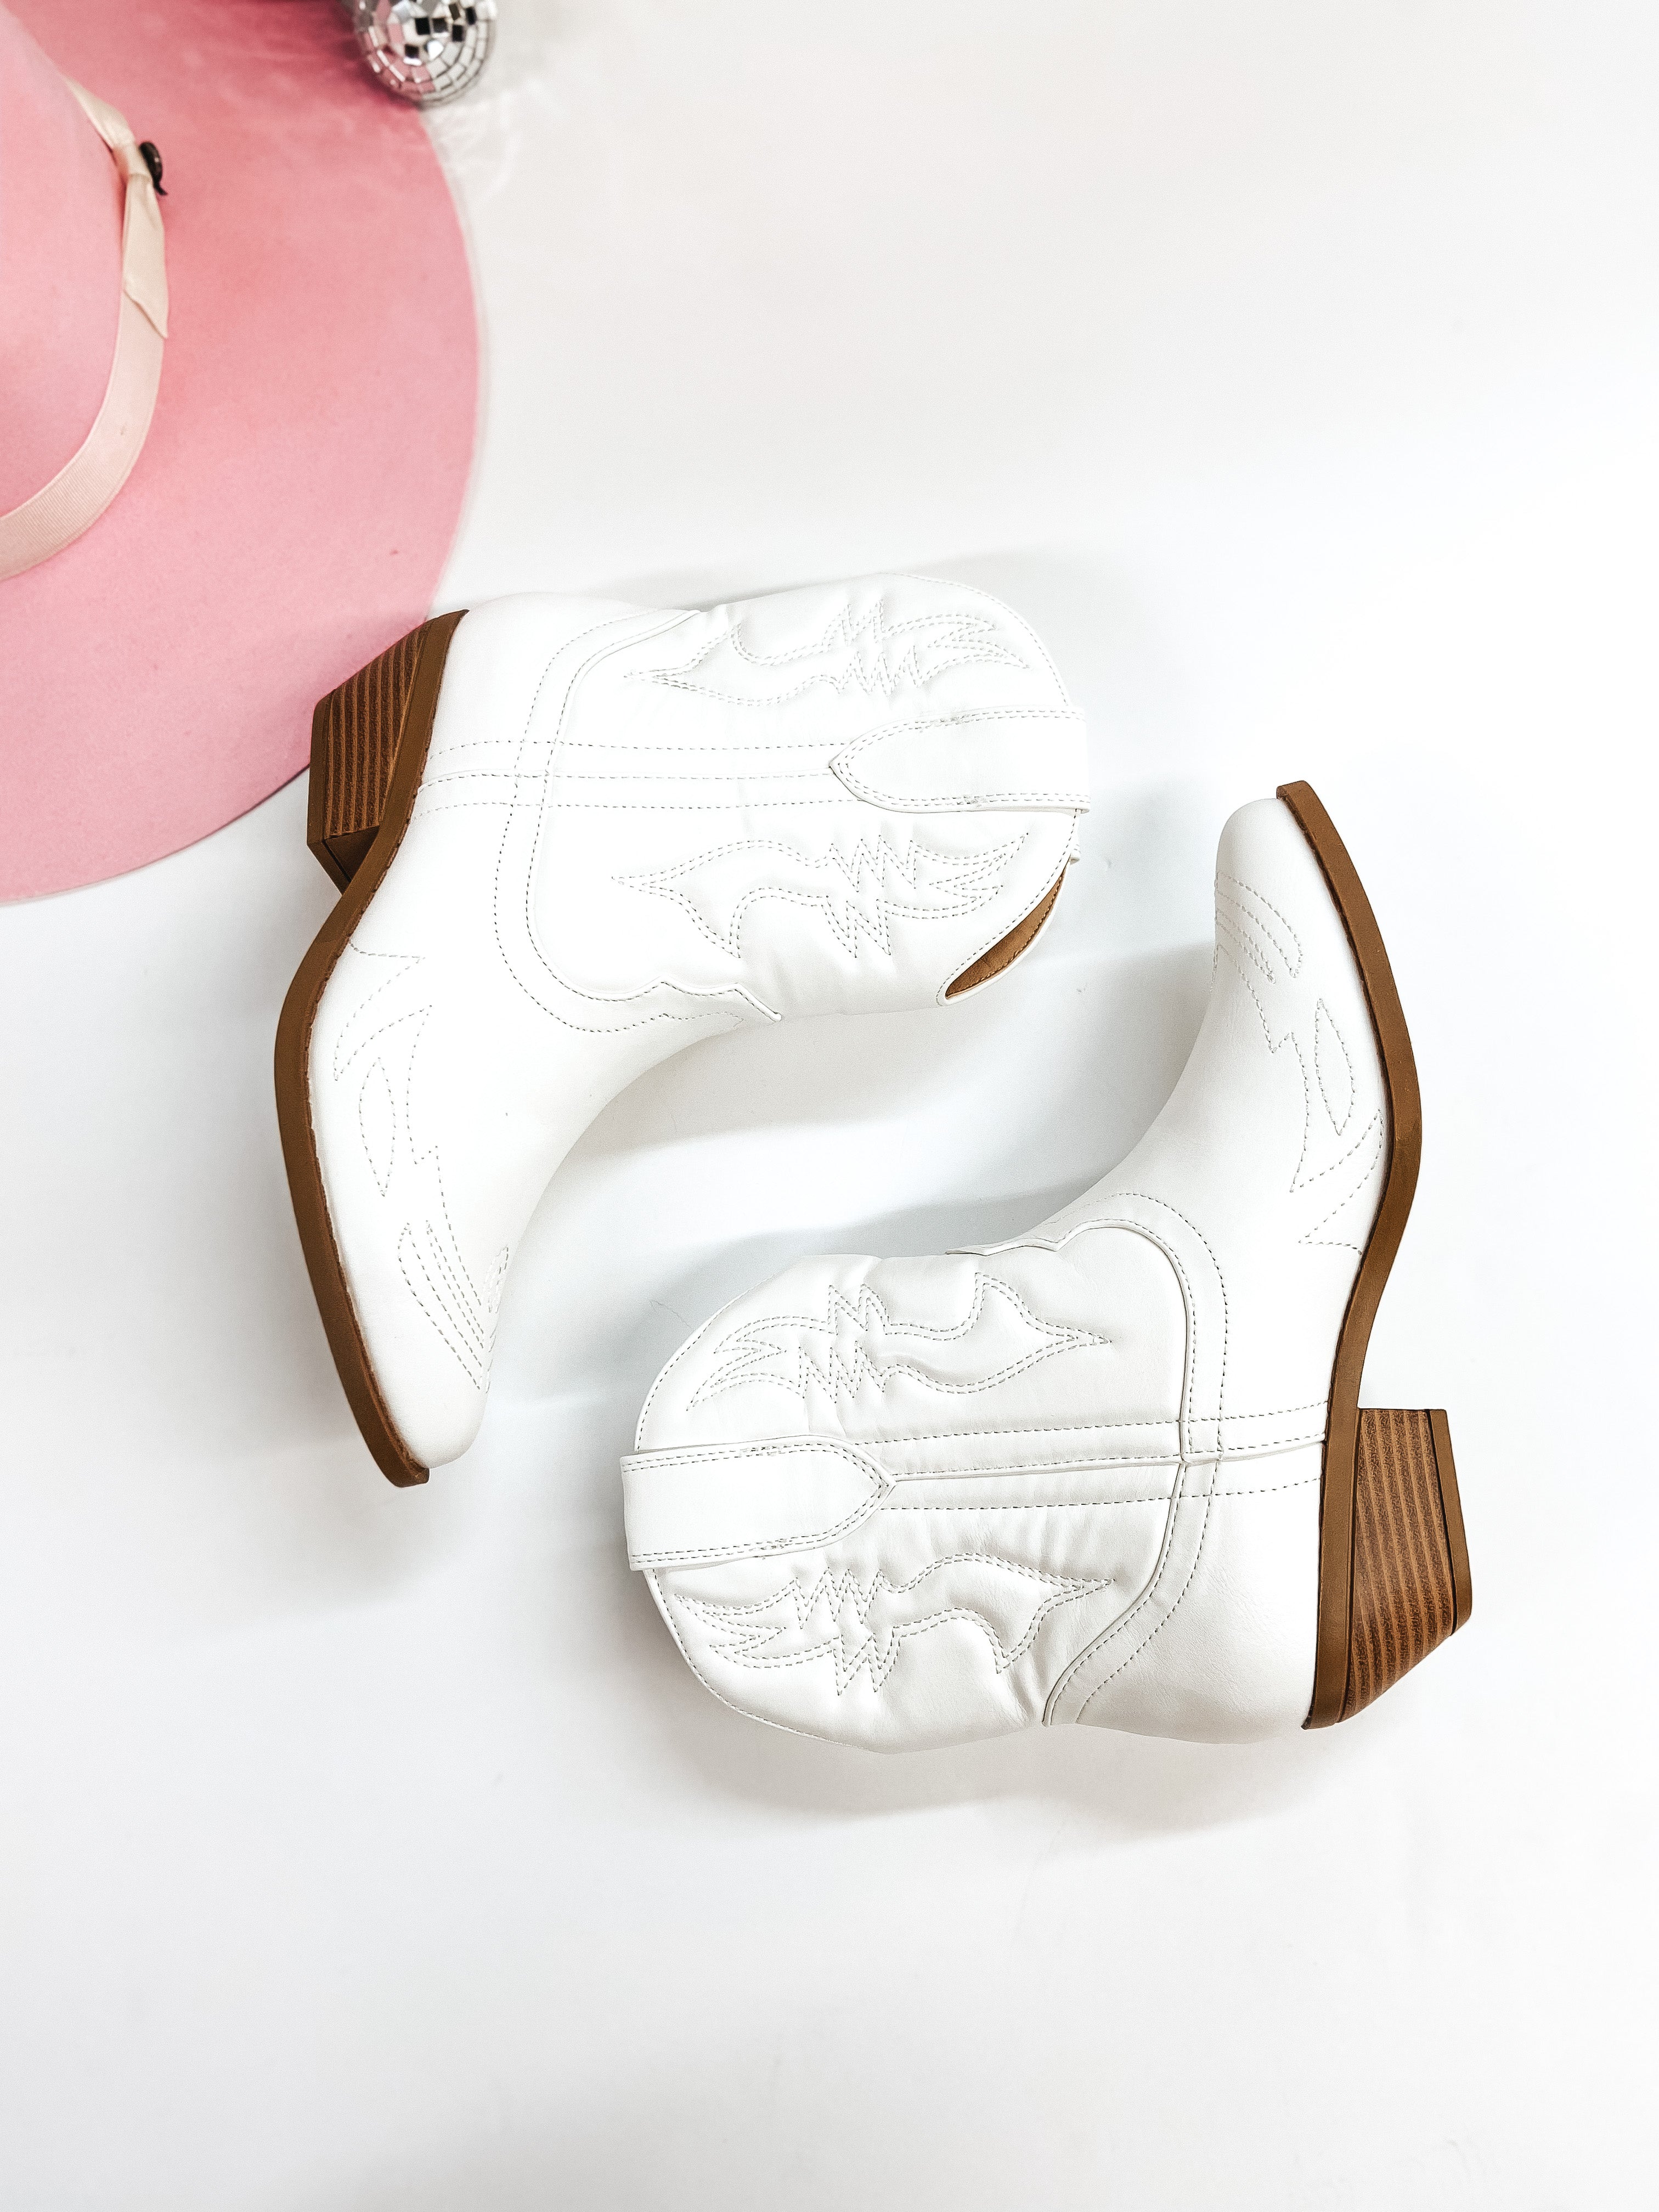 Wild and Wanted Cowgirl Ankle Booties in White - Giddy Up Glamour Boutique